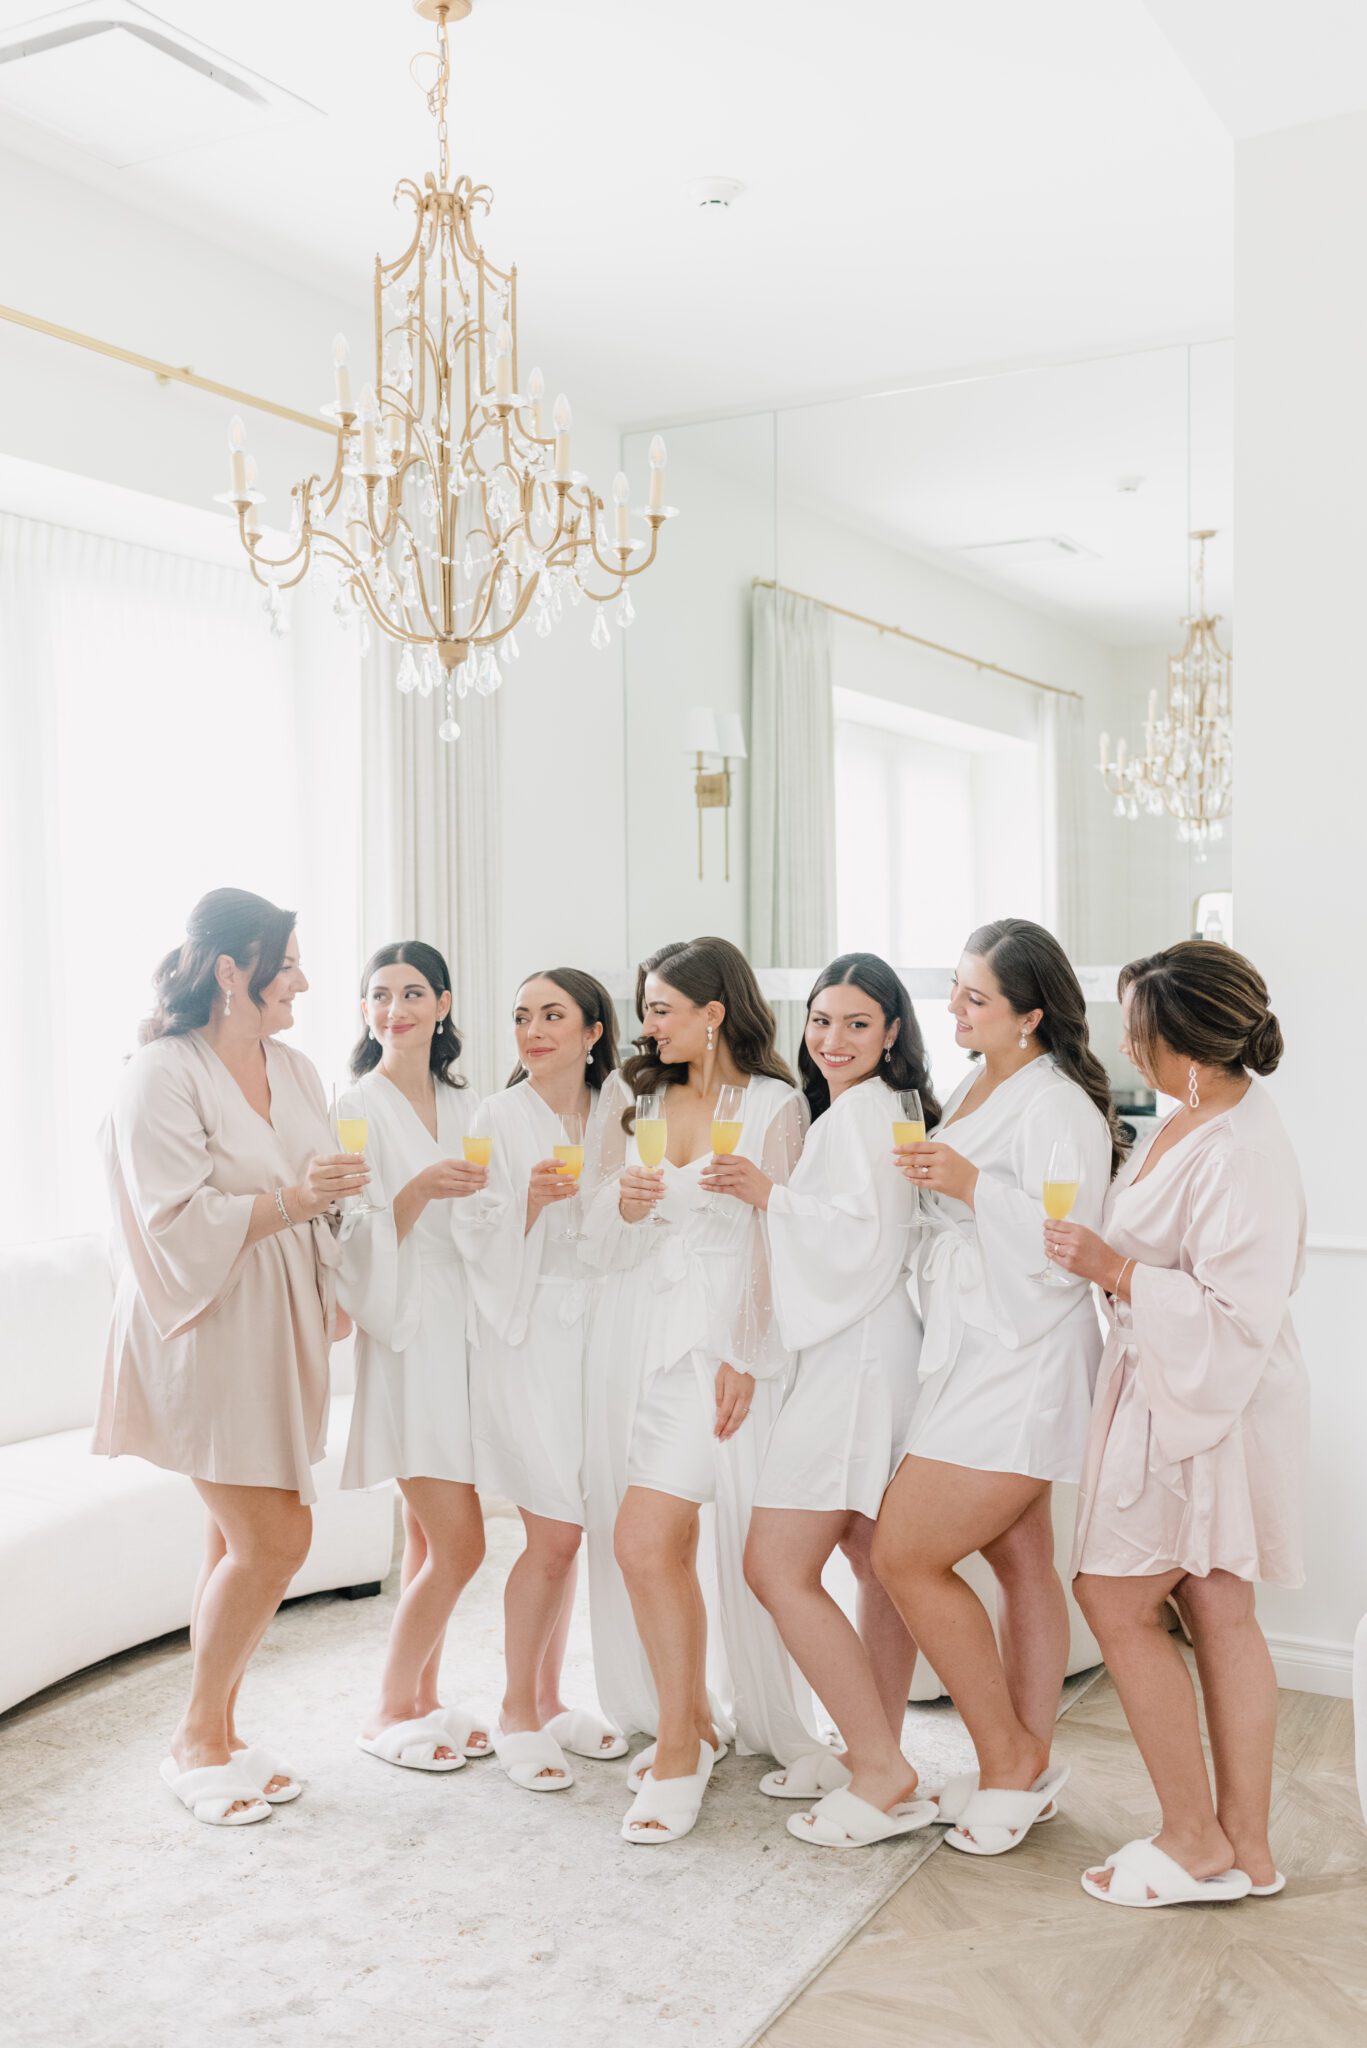 Stunning bride getting ready for her wedding day, drinking mimosas with bridesmaids, wearing elegant bridal robes.